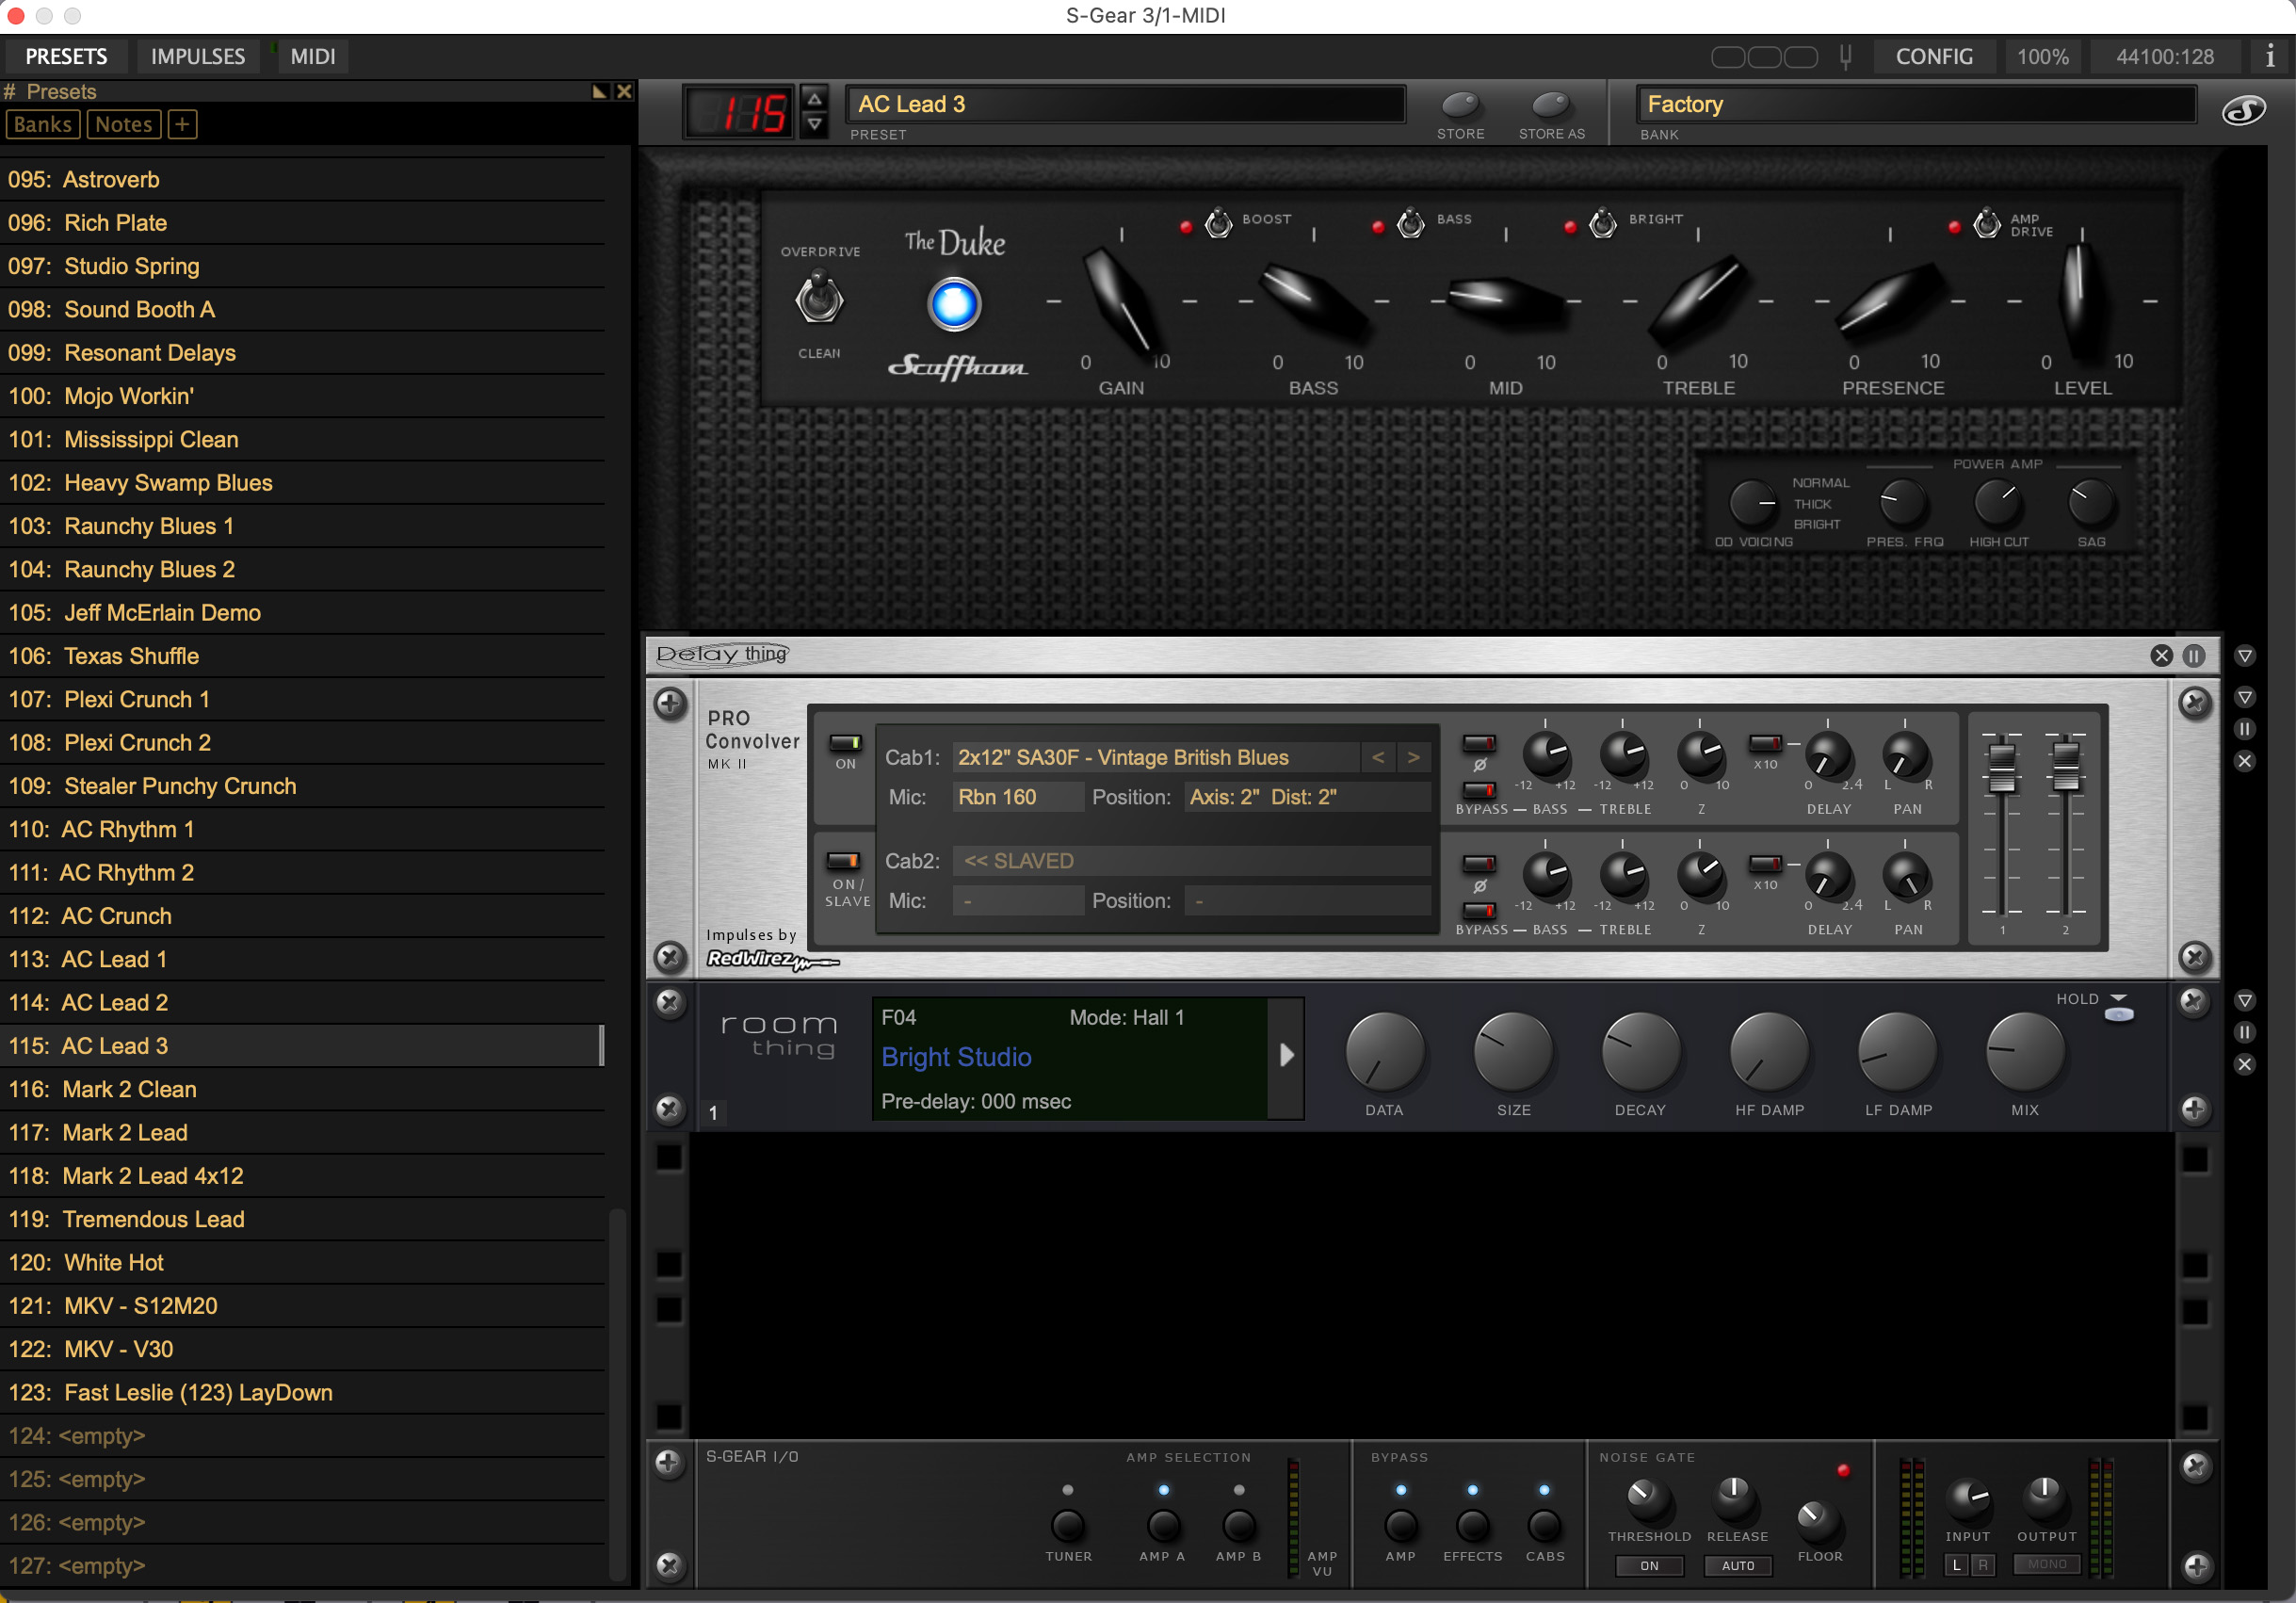 Scuffham Amps updates S-Gear to v3.22